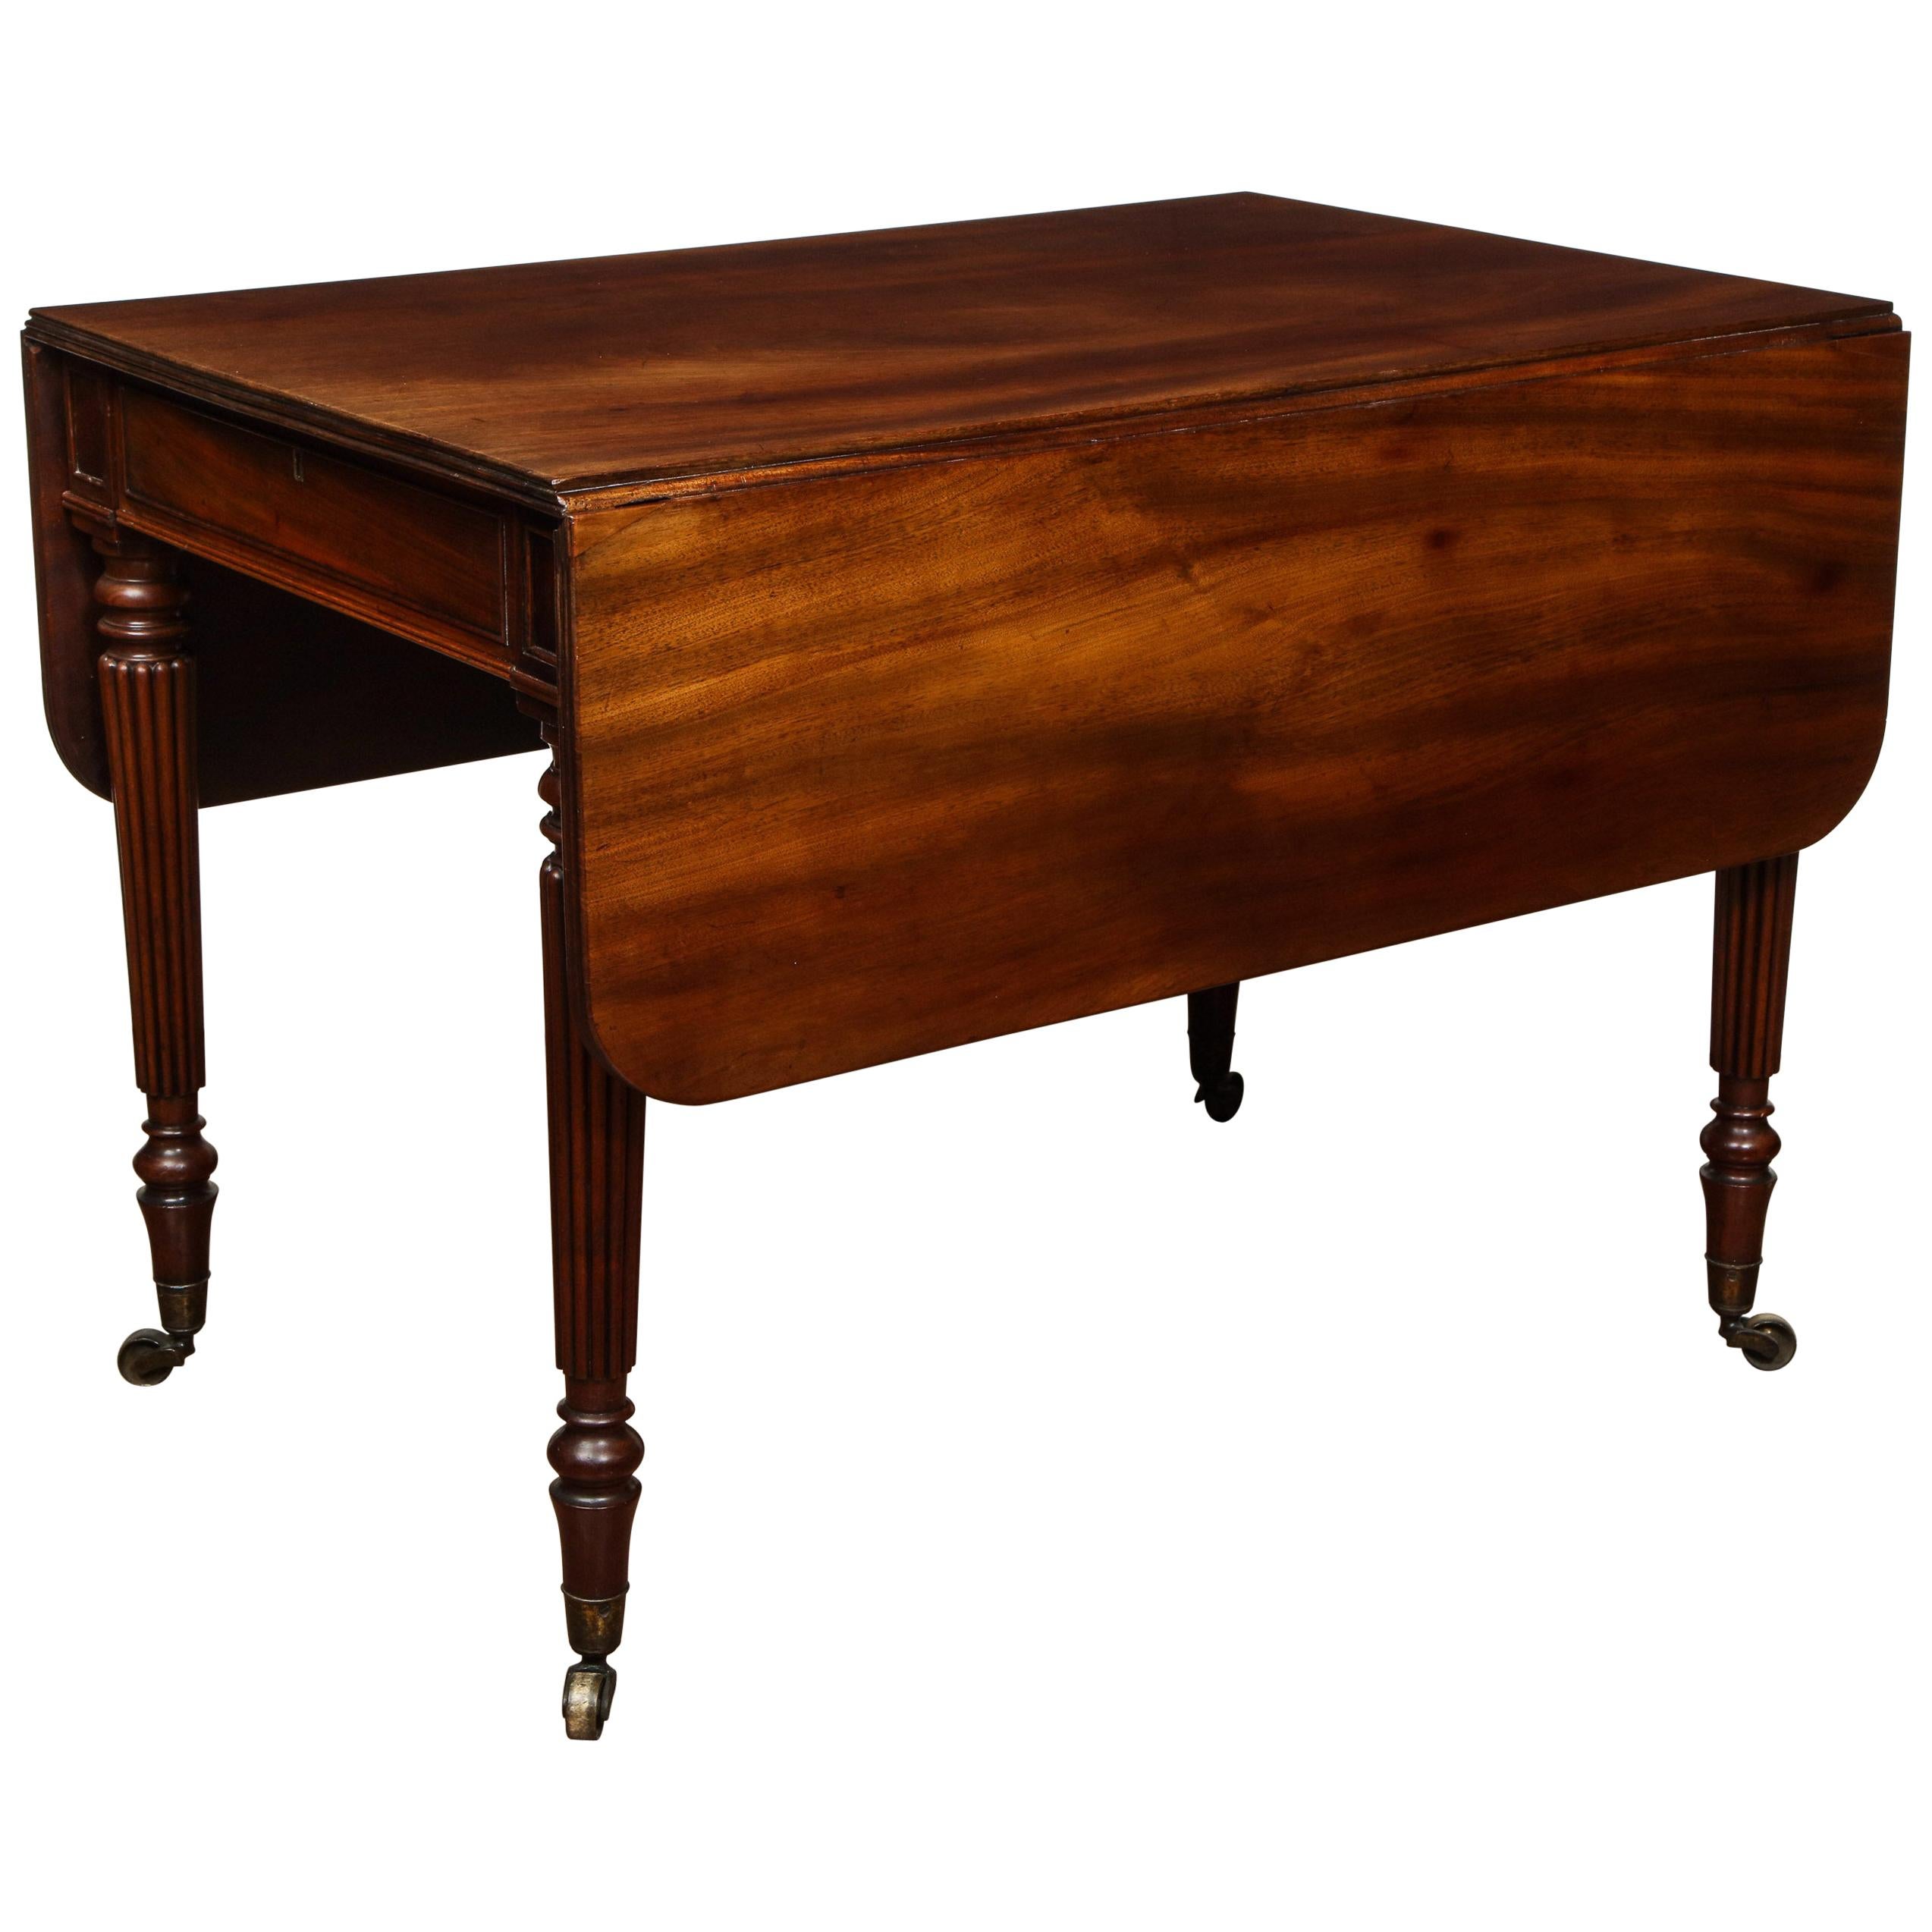 19th Century English Pembroke Table with One Drawer in Mahogany